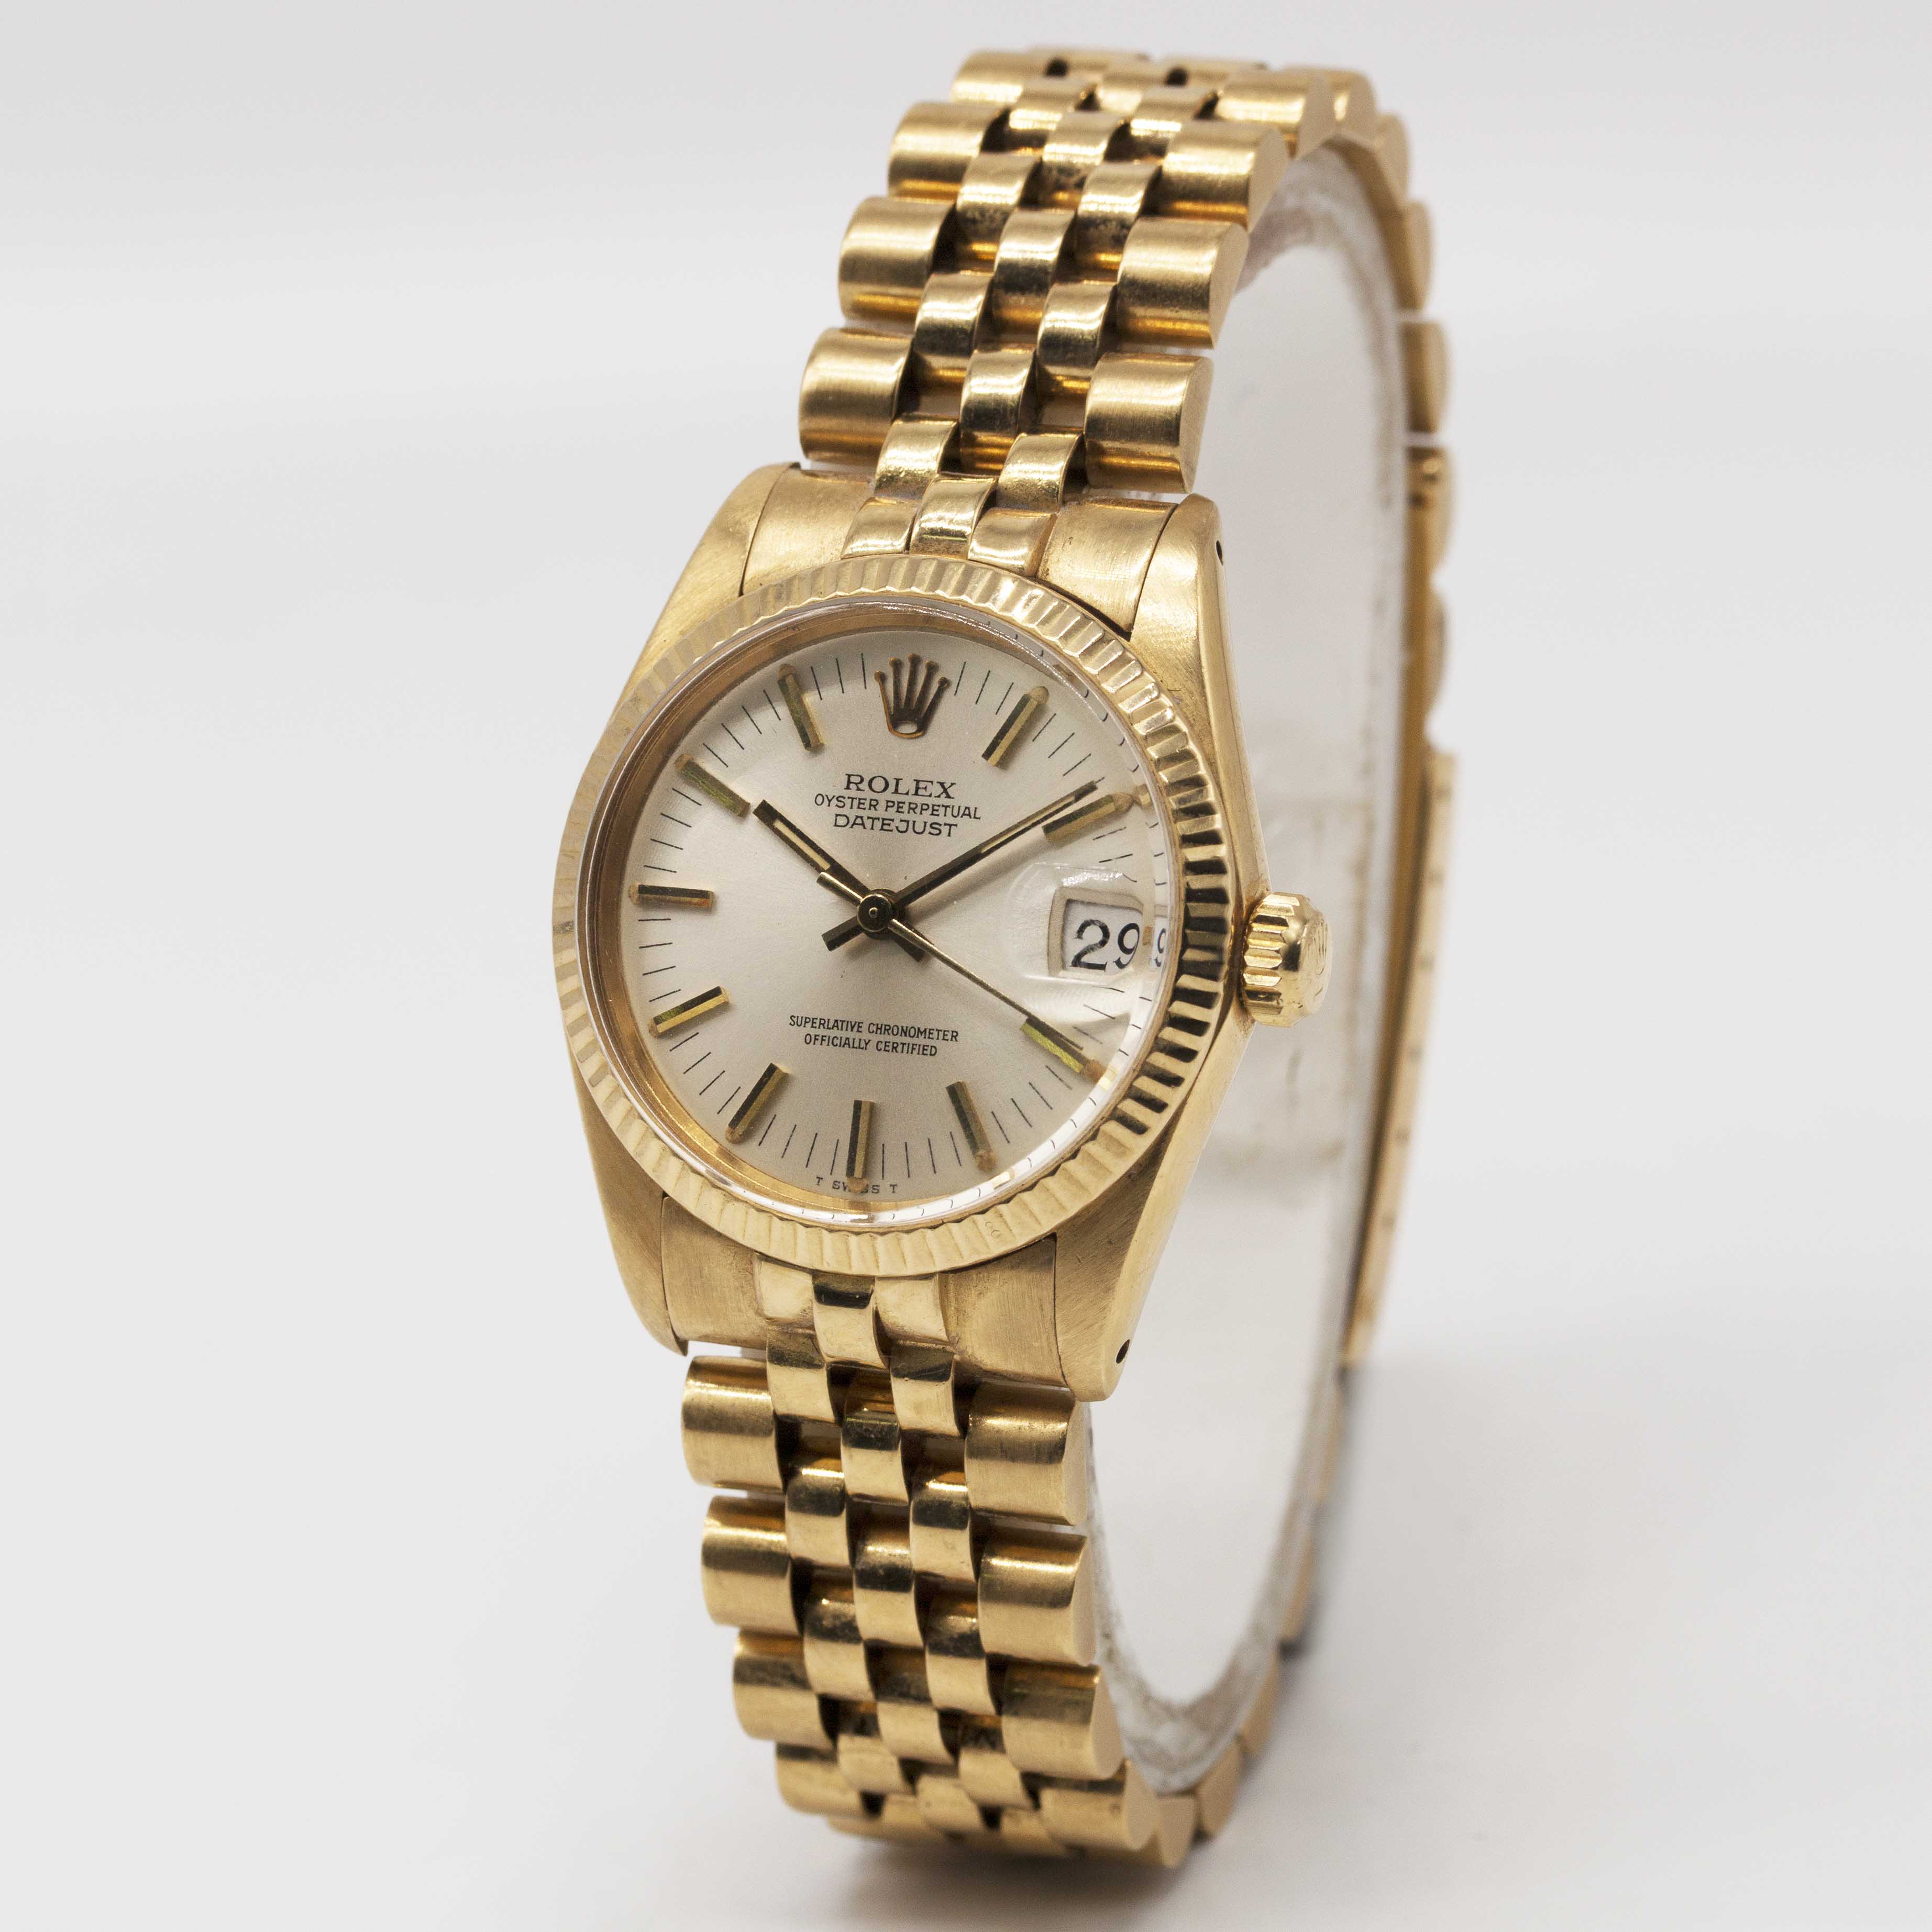 A MID SIZE 18K SOLID GOLD ROLEX OYSTER PERPETUAL DATEJUST BRACELET WATCH CIRCA 1979, REF. 6827 - Image 3 of 6